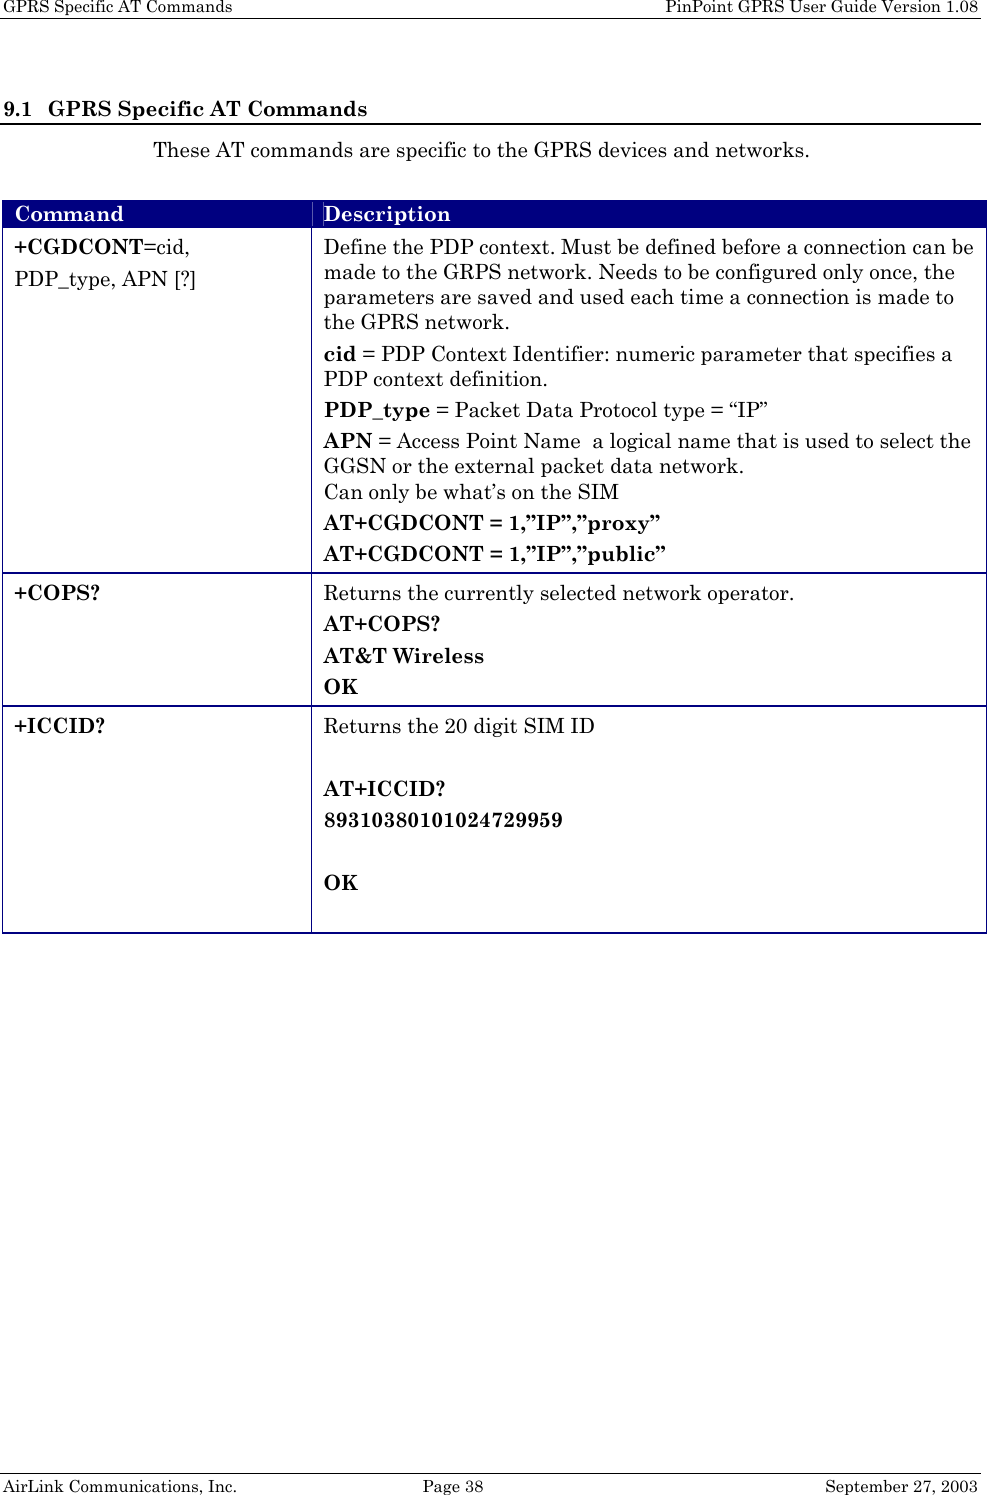 GPRS Specific AT Commands    PinPoint GPRS User Guide Version 1.08 AirLink Communications, Inc.  Page 38  September 27, 2003 9.1 GPRS Specific AT Commands These AT commands are specific to the GPRS devices and networks.  Command Description +CGDCONT=cid, PDP_type, APN [?] Define the PDP context. Must be defined before a connection can be made to the GRPS network. Needs to be configured only once, the parameters are saved and used each time a connection is made to the GPRS network. cid = PDP Context Identifier: numeric parameter that specifies a PDP context definition.  PDP_type = Packet Data Protocol type = “IP” APN = Access Point Name  a logical name that is used to select the GGSN or the external packet data network. Can only be what’s on the SIM AT+CGDCONT = 1,”IP”,”proxy” AT+CGDCONT = 1,”IP”,”public” +COPS?  Returns the currently selected network operator.  AT+COPS? AT&amp;T Wireless OK +ICCID?  Returns the 20 digit SIM ID  AT+ICCID? 89310380101024729959  OK  